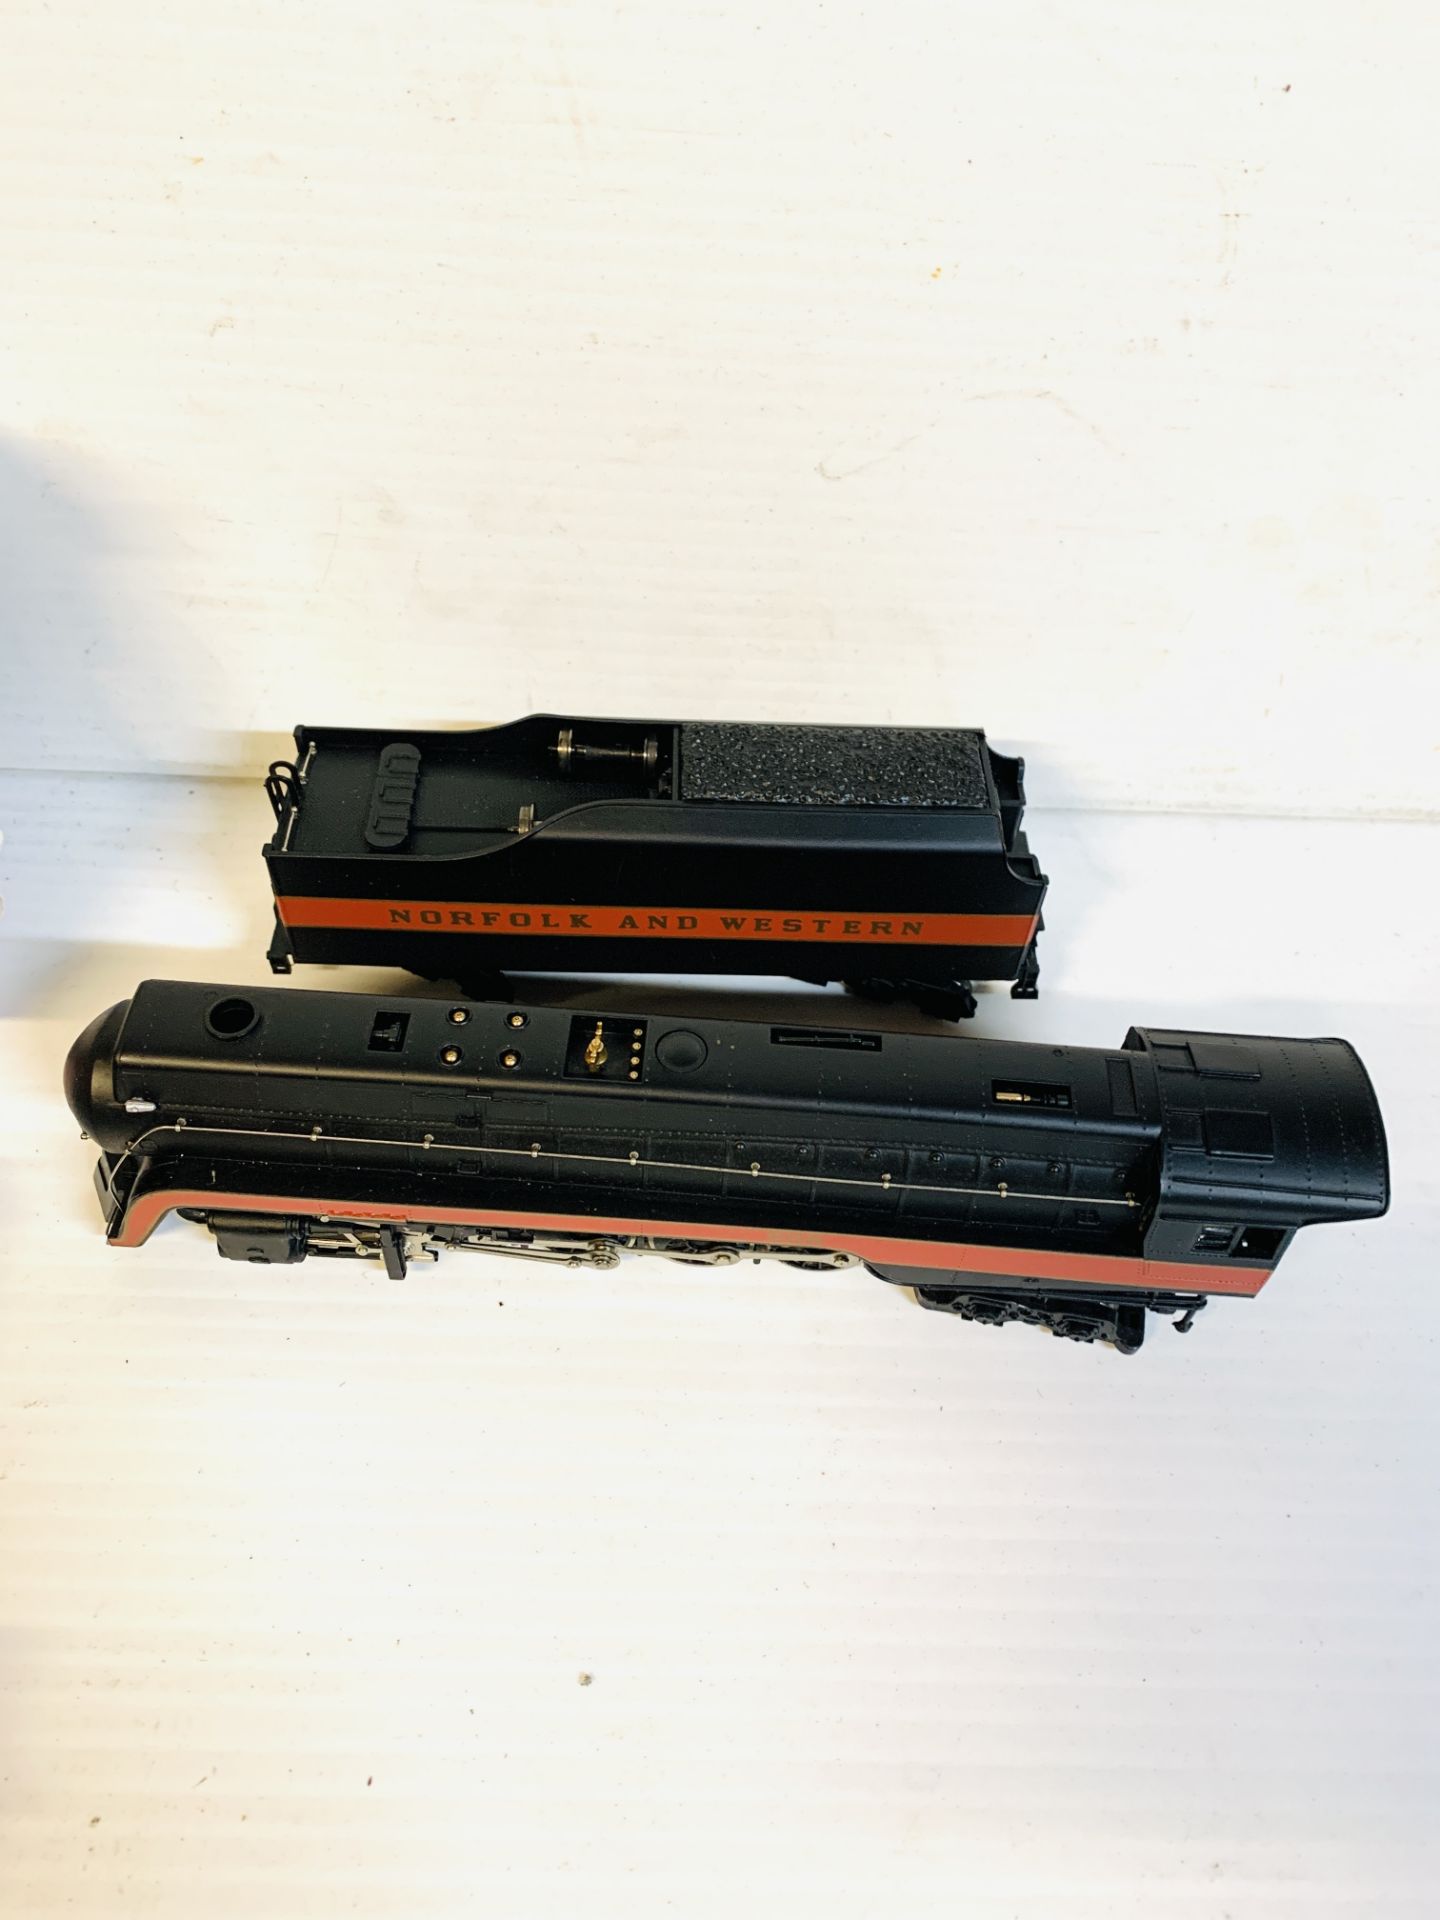 Three Bachmann locomotive and tender together with a Mehano Santa Fe locomotive and tender. - Bild 3 aus 4